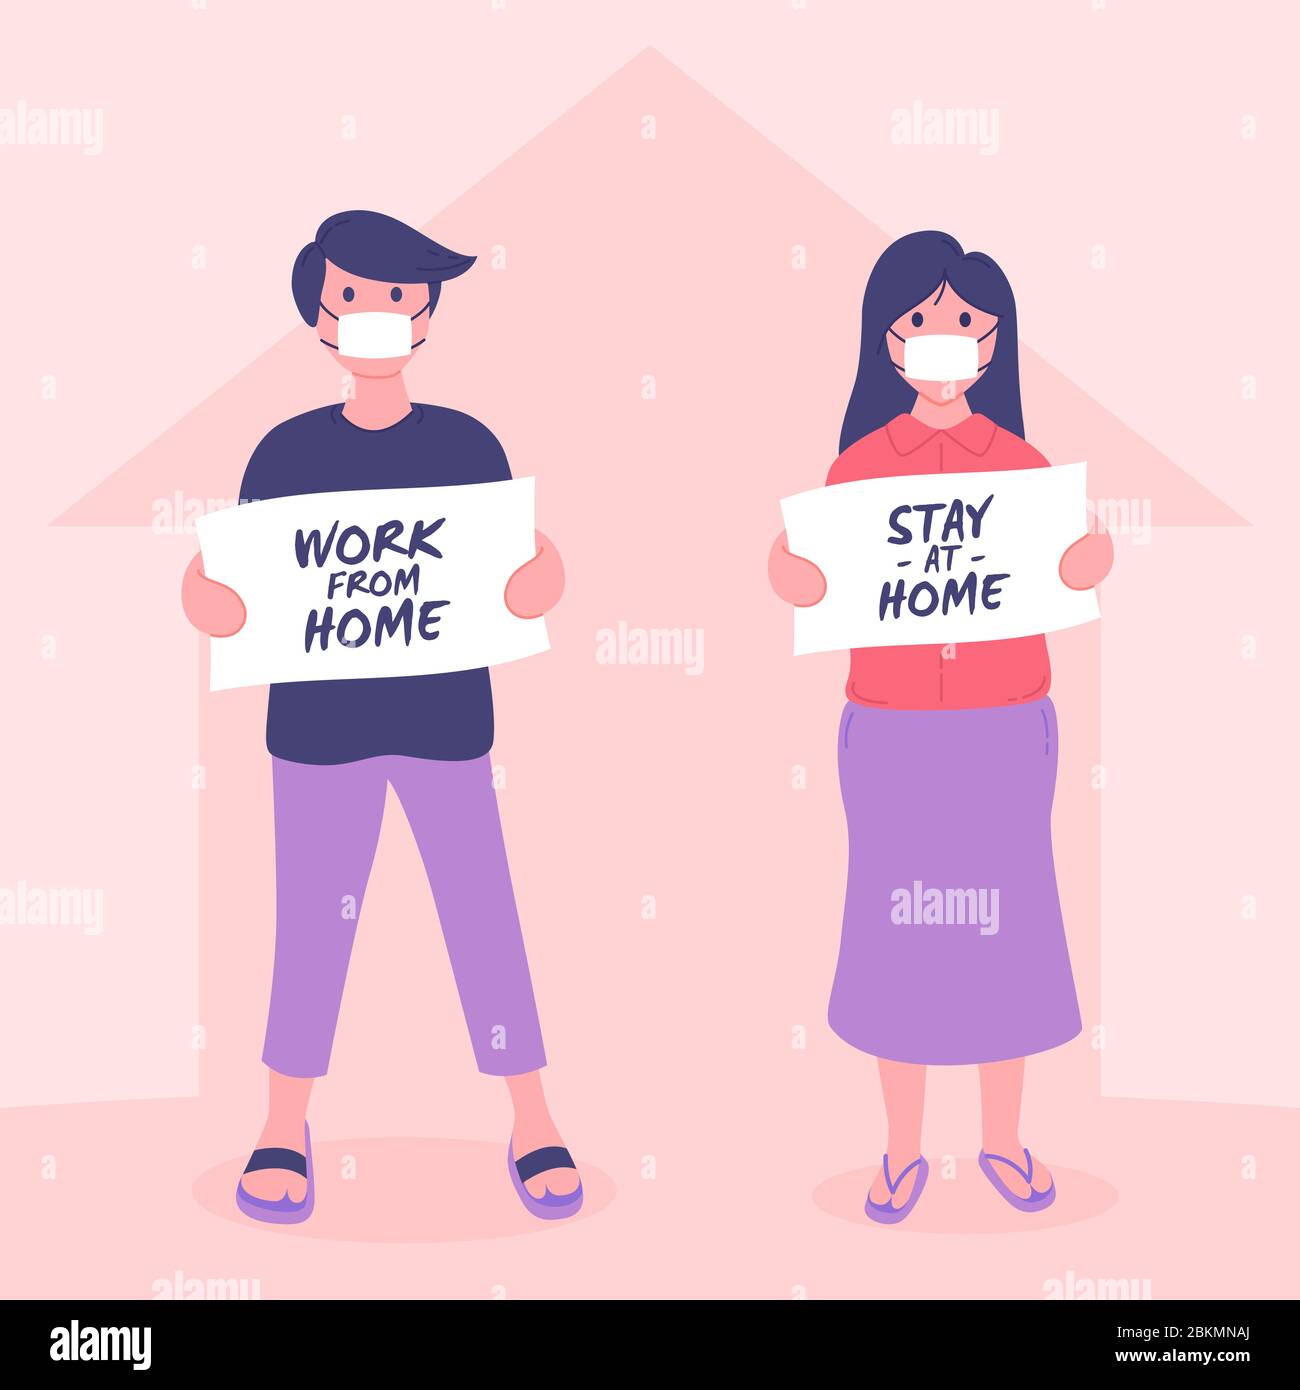 Stay at home awareness social media campaign and coronavirus prevention. Campaign to stay at home and work from home. People wearing face masks Stock Vector